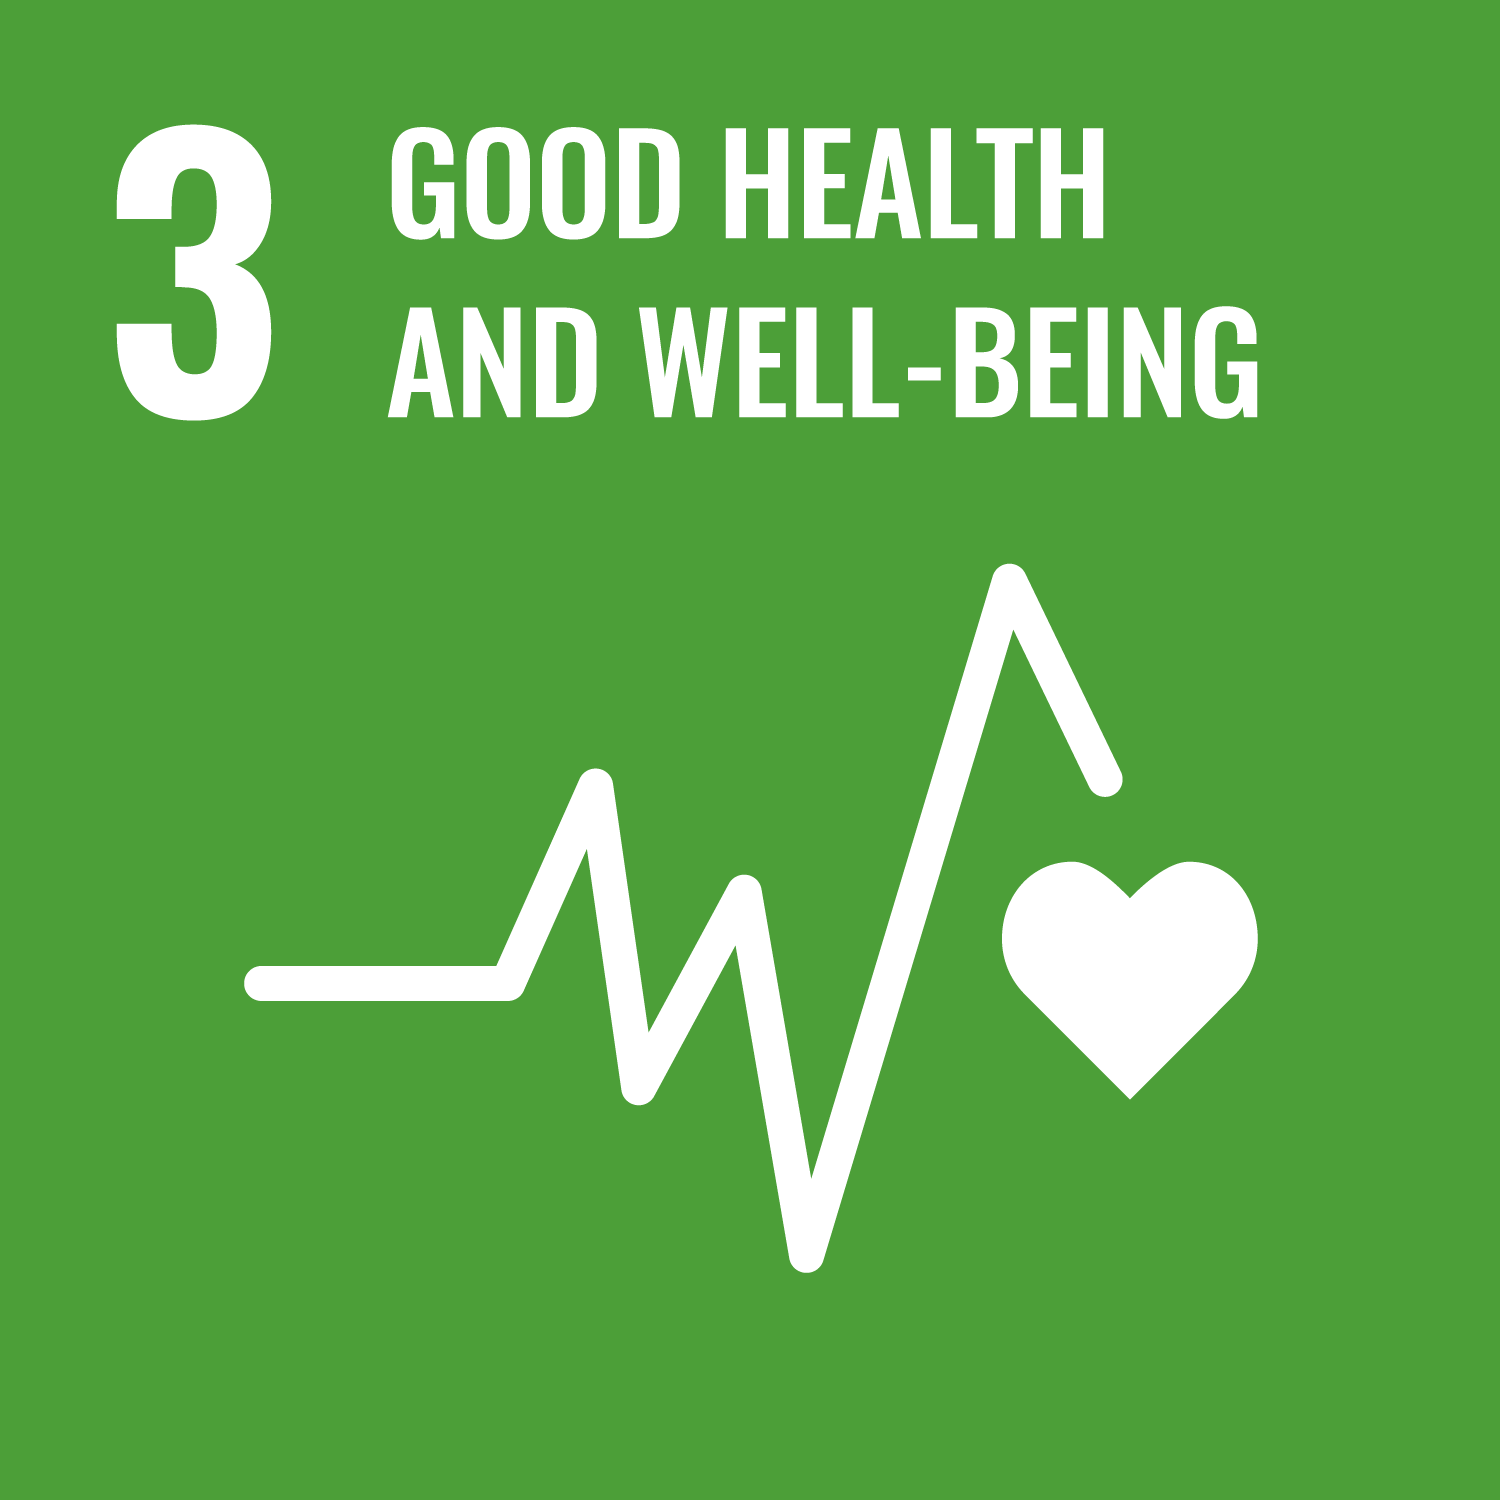 SDG Good Health and Well-Being